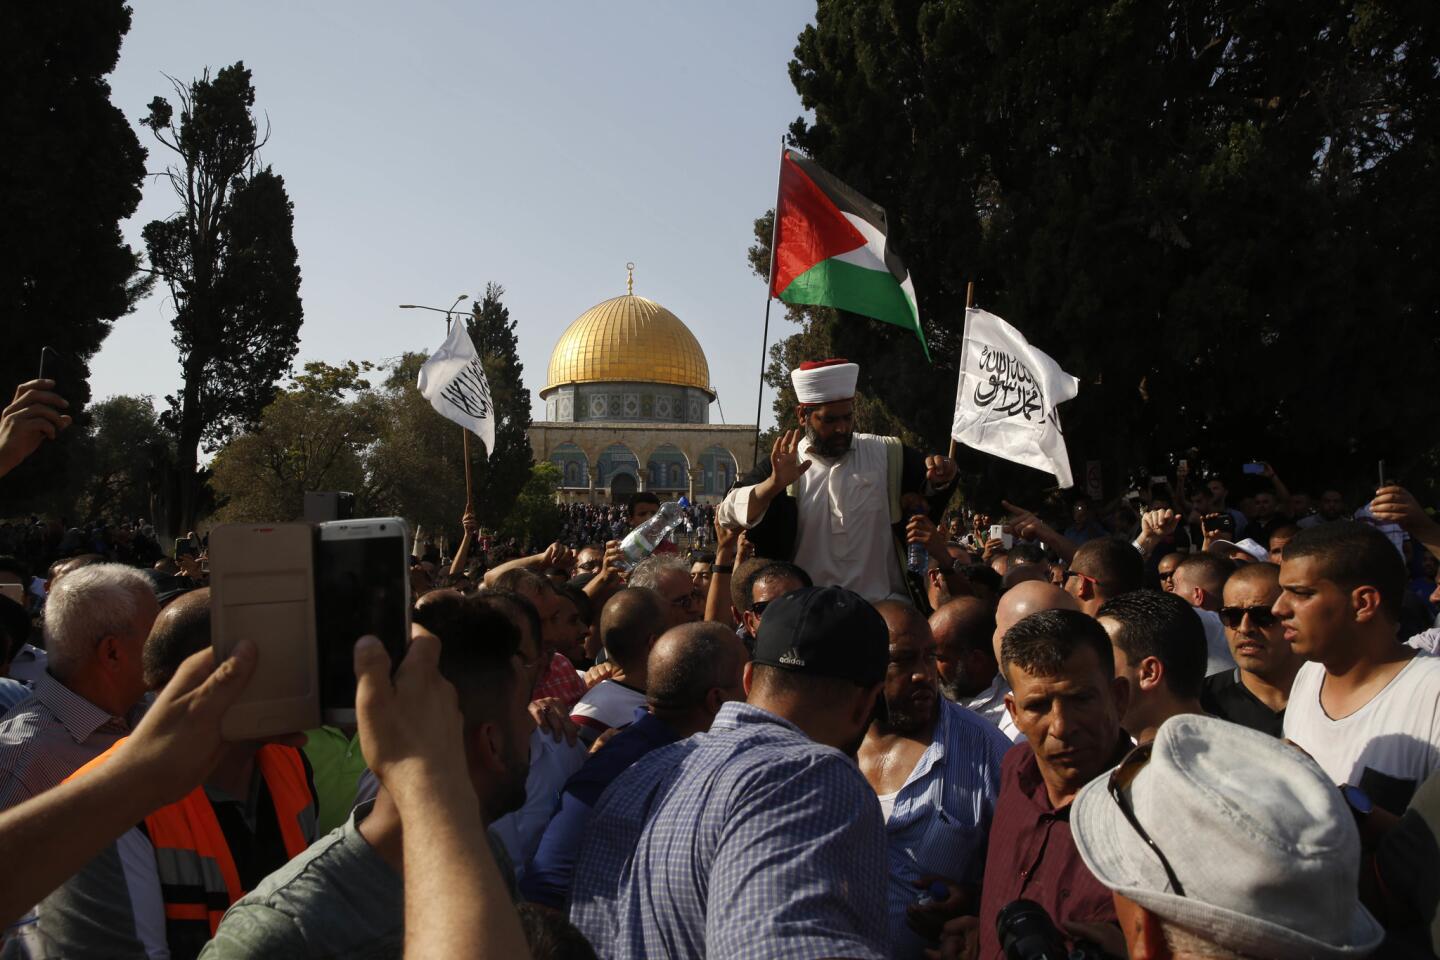 Palestinians are seen inside the Al Aqsa Mosque compound in Jerusalem's Old City Thursday, July 27.